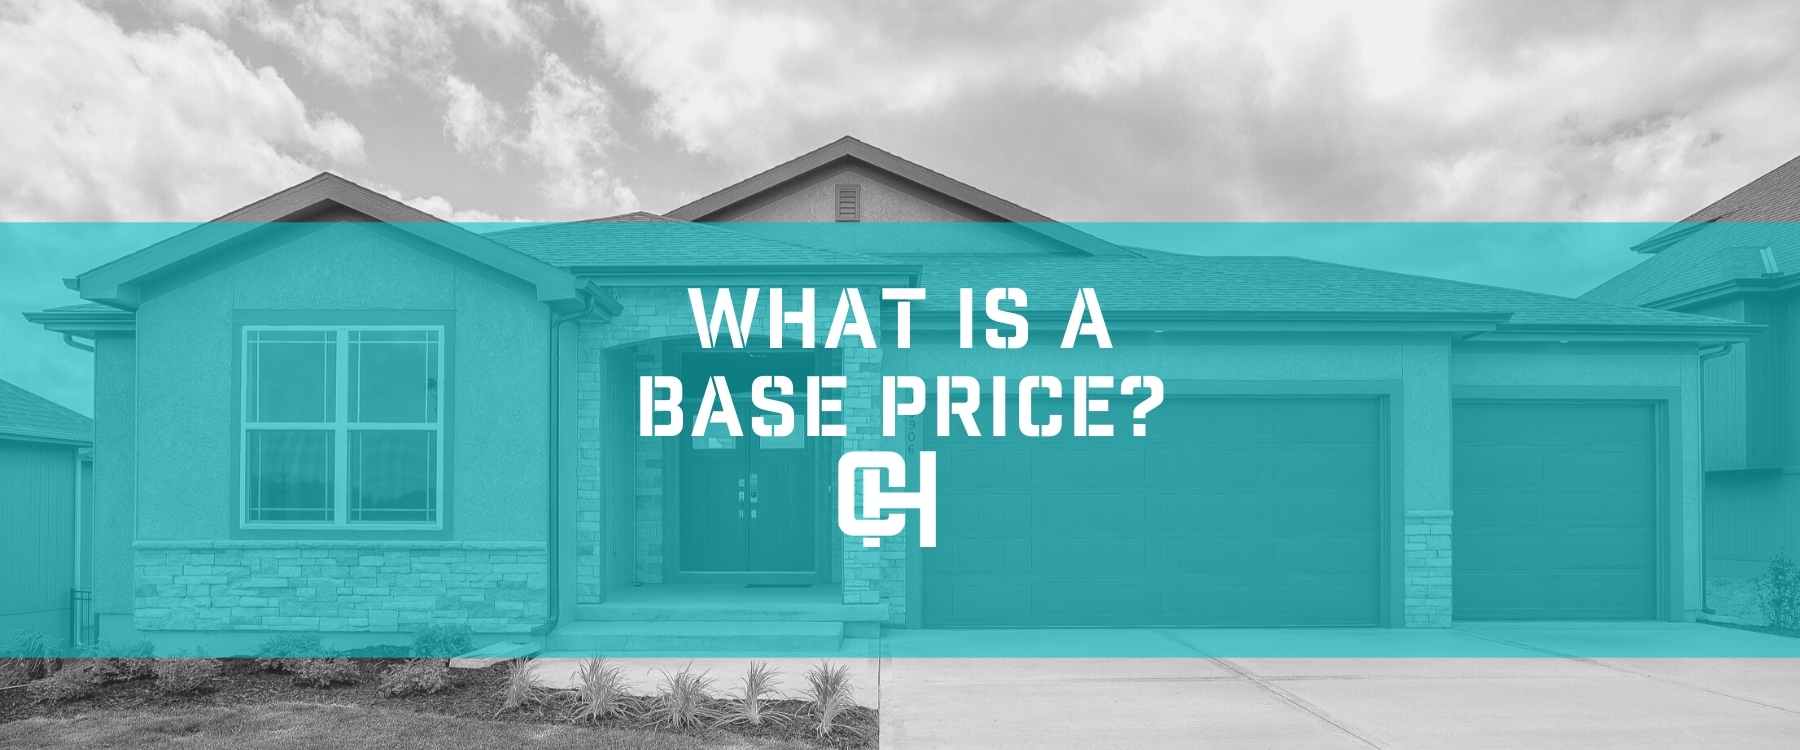 What is a base price | Kansas City Home Builder